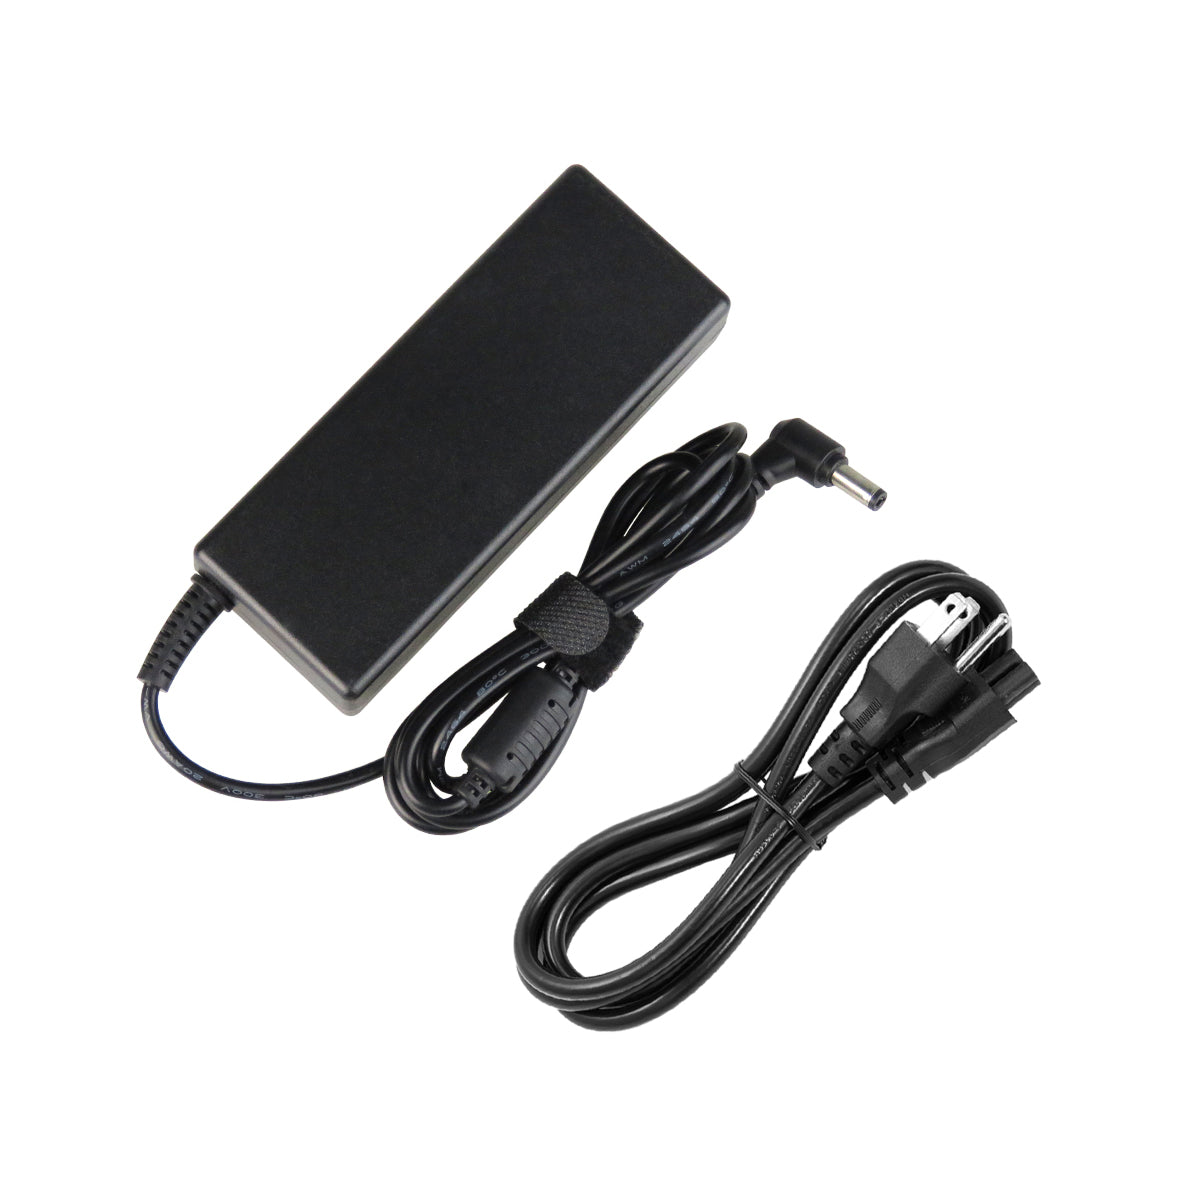 AC Adapter Charger for ASUS P45 Notebook.